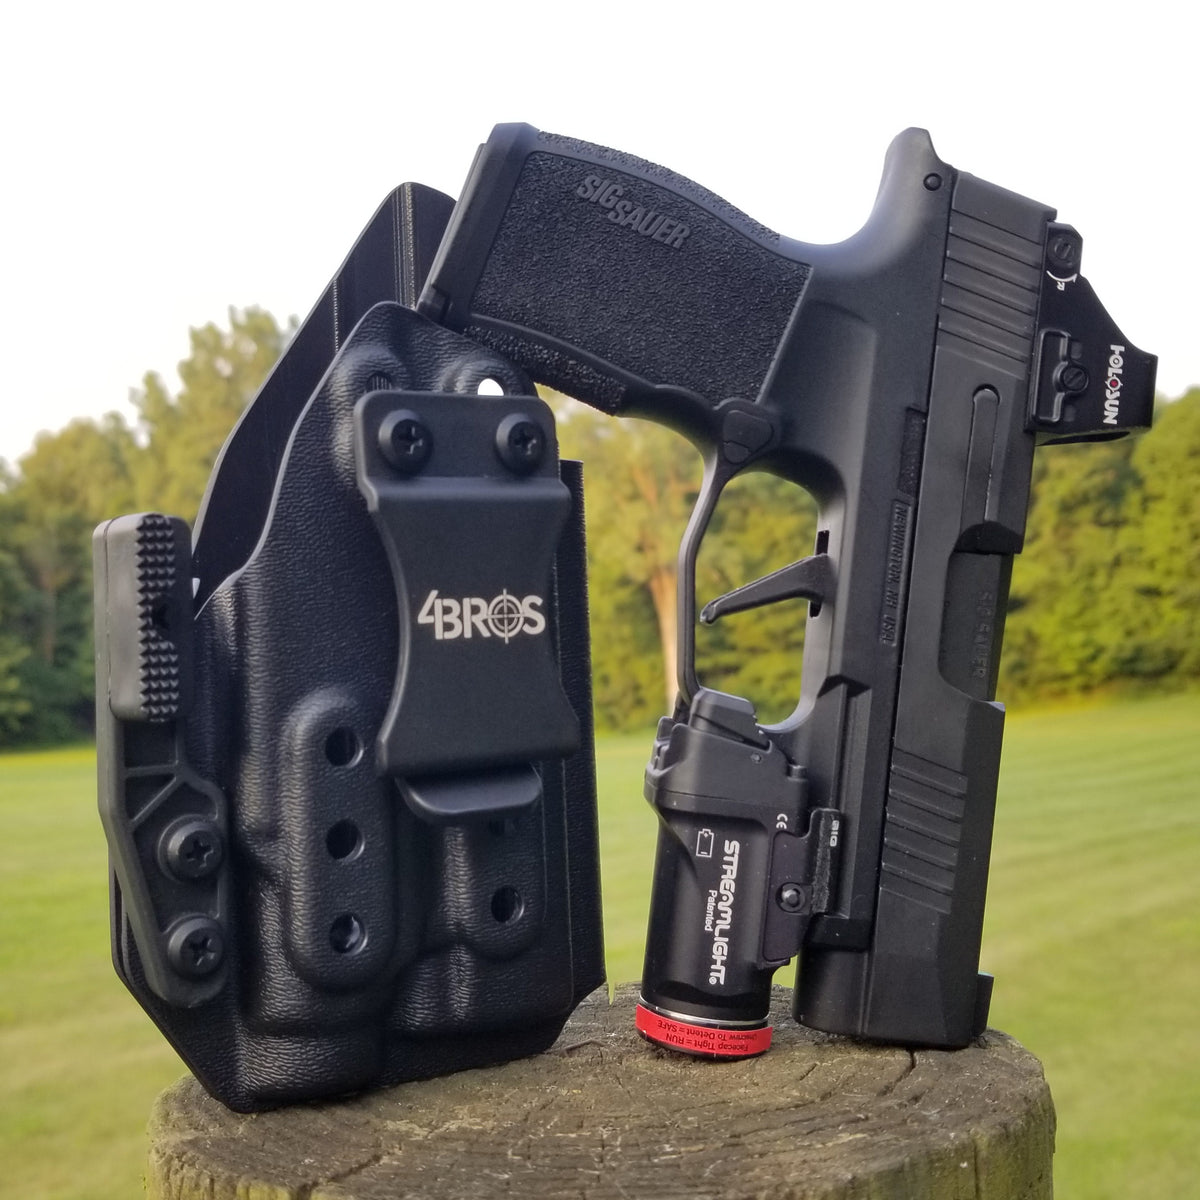 OCW Light Compatible Holster + TLR-7タイプ - ミリタリー